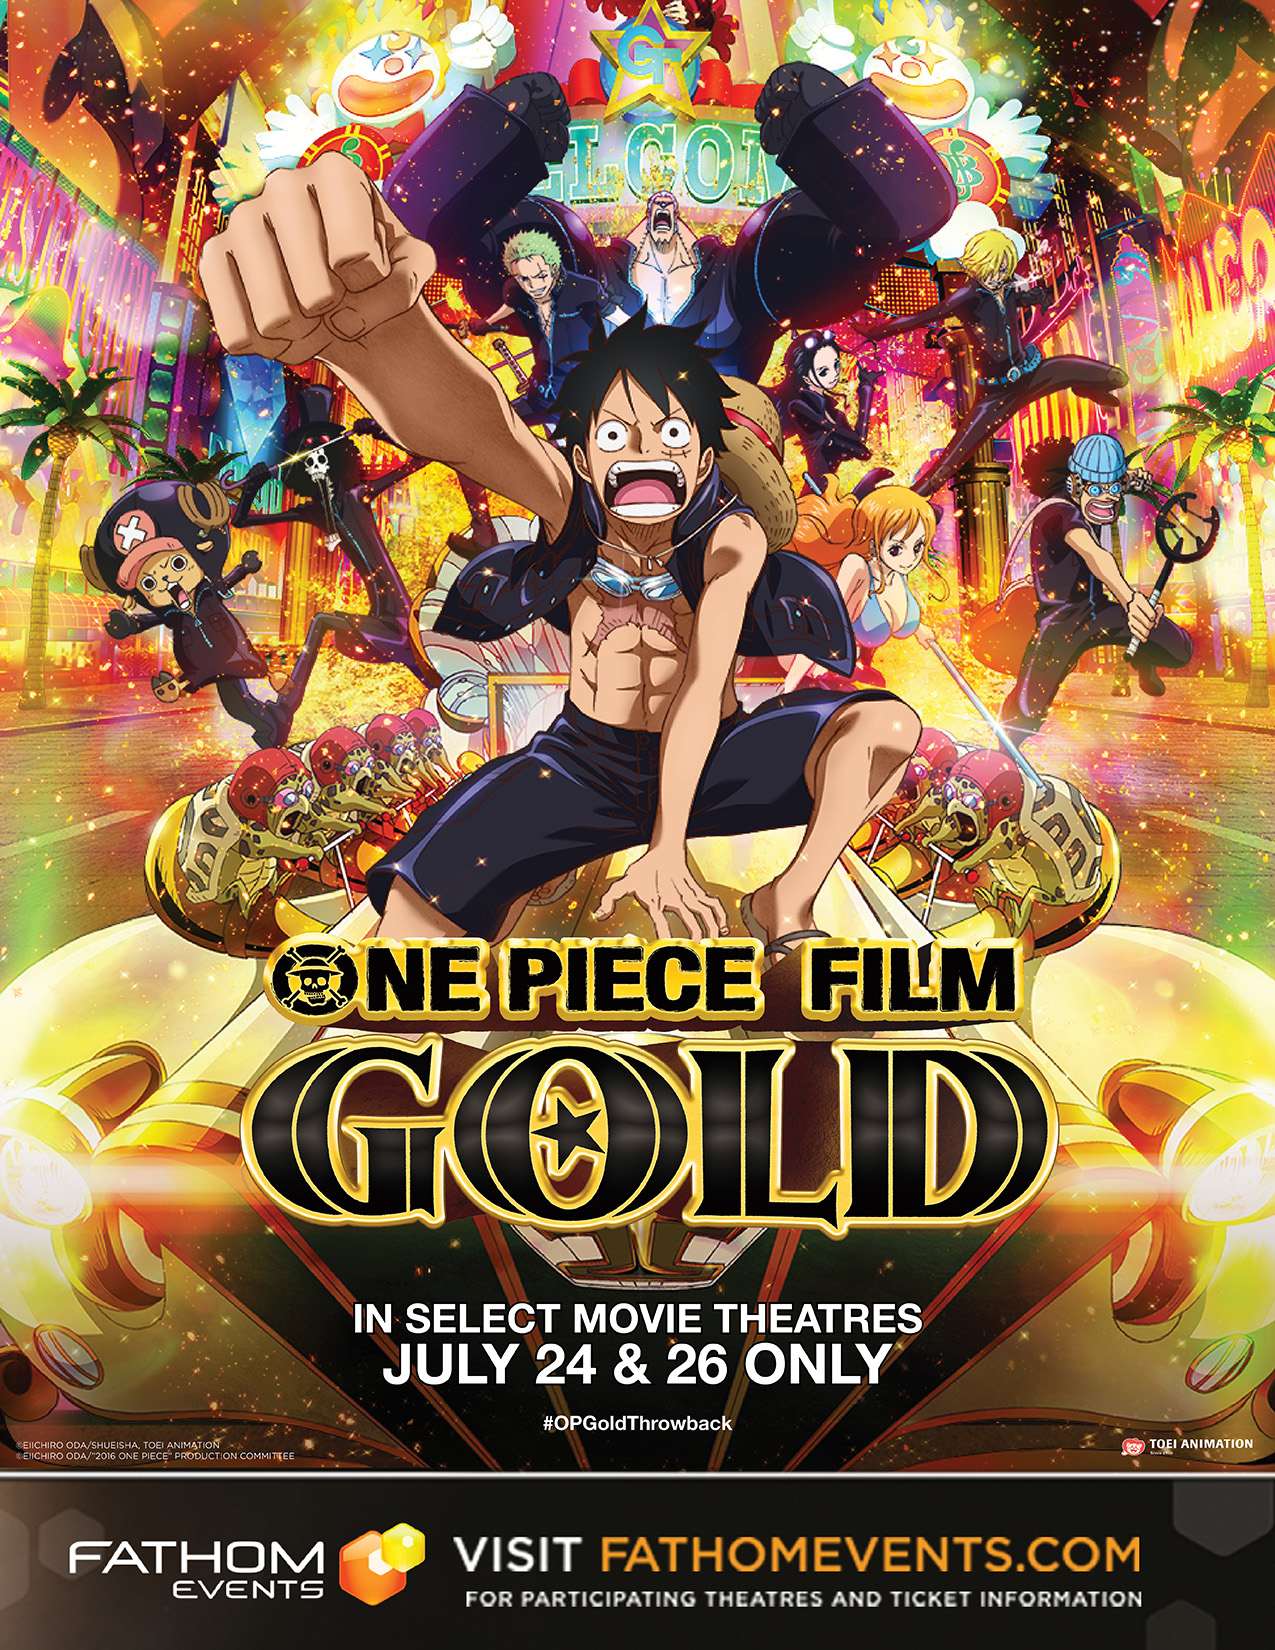 New One Piece Film Gold Scan Shows Off Character Designs & Theater Bonuses